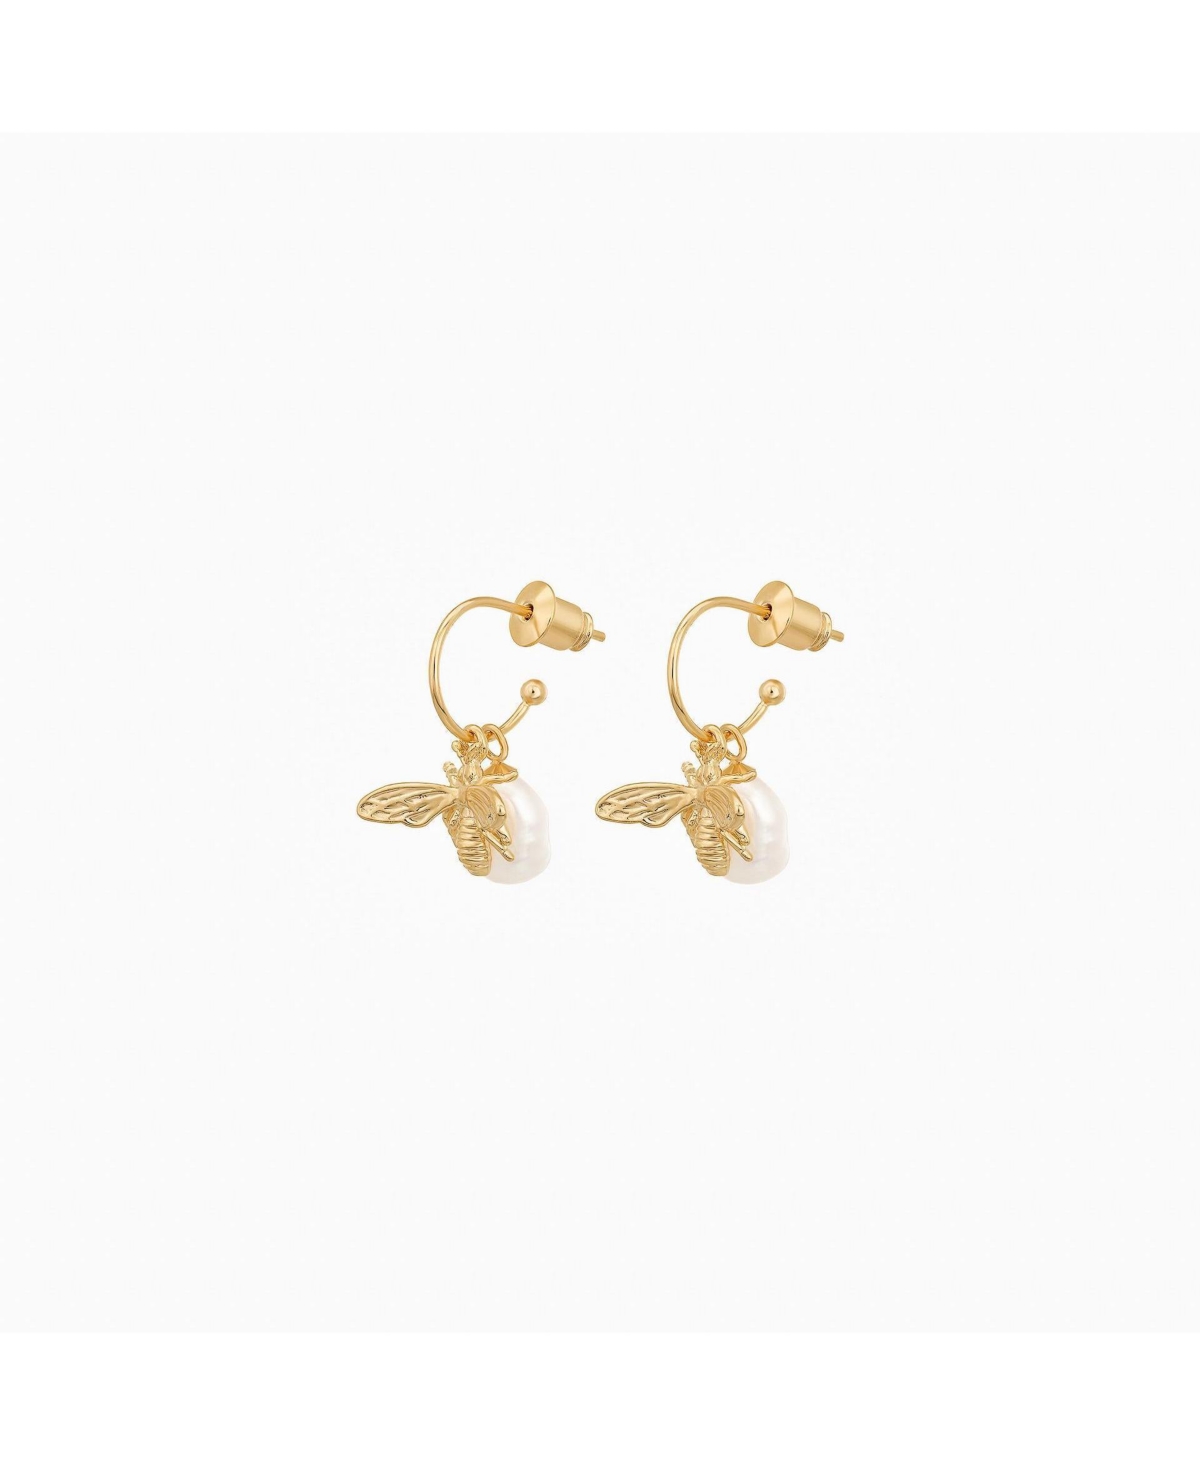 Bee Cultured Pearl Earrings - Yellow gold